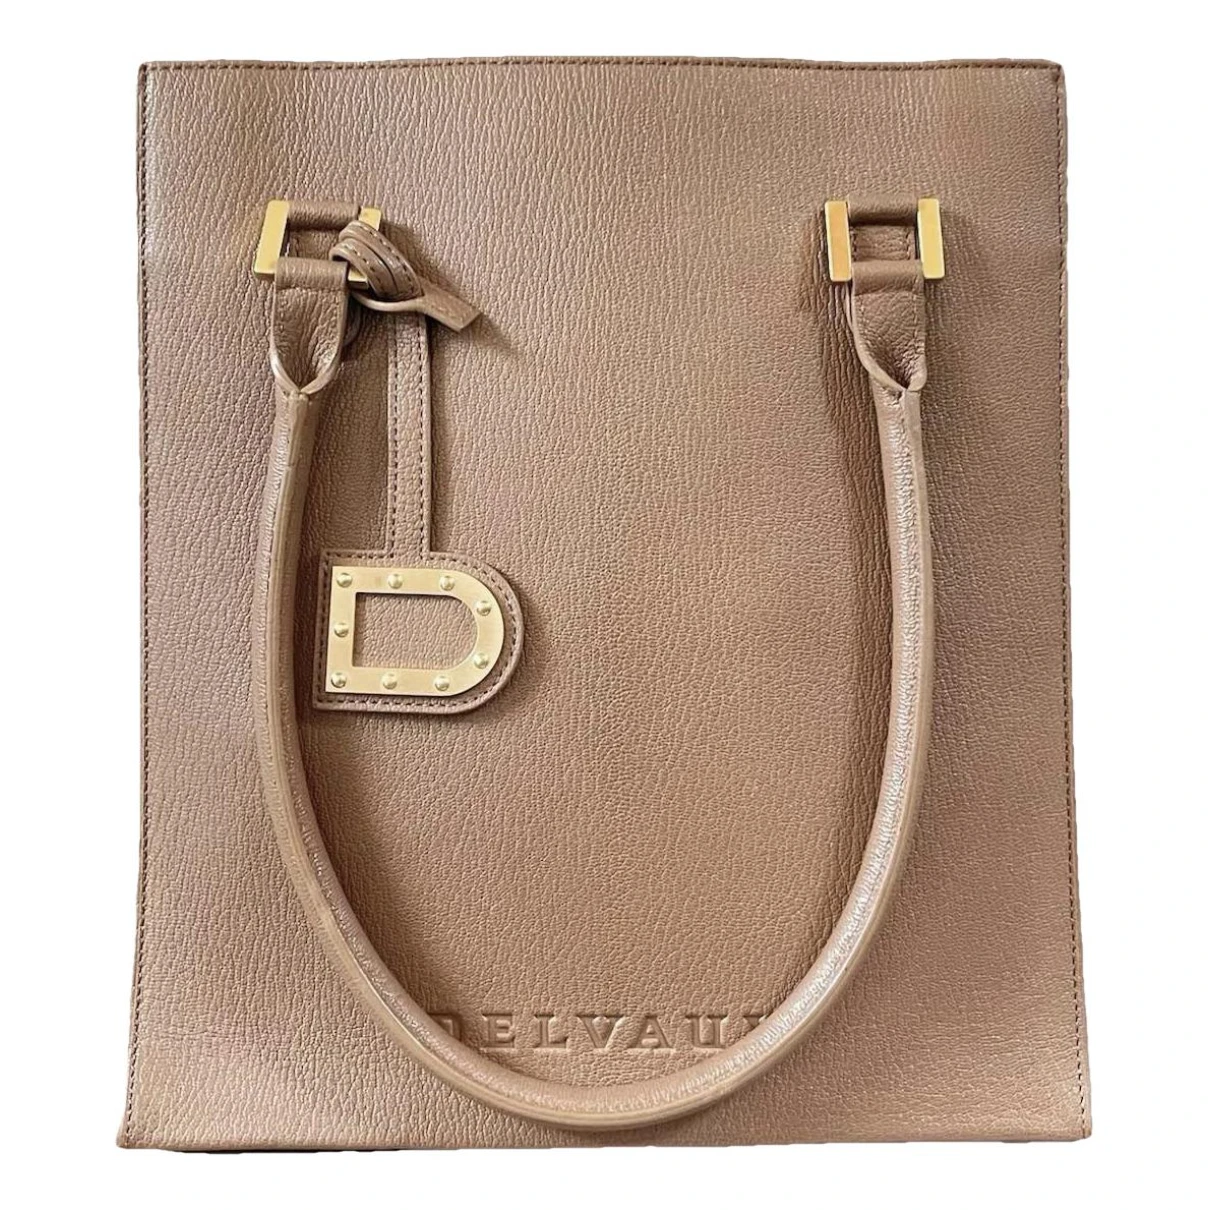 Pre-owned Delvaux Leather Tote In Camel